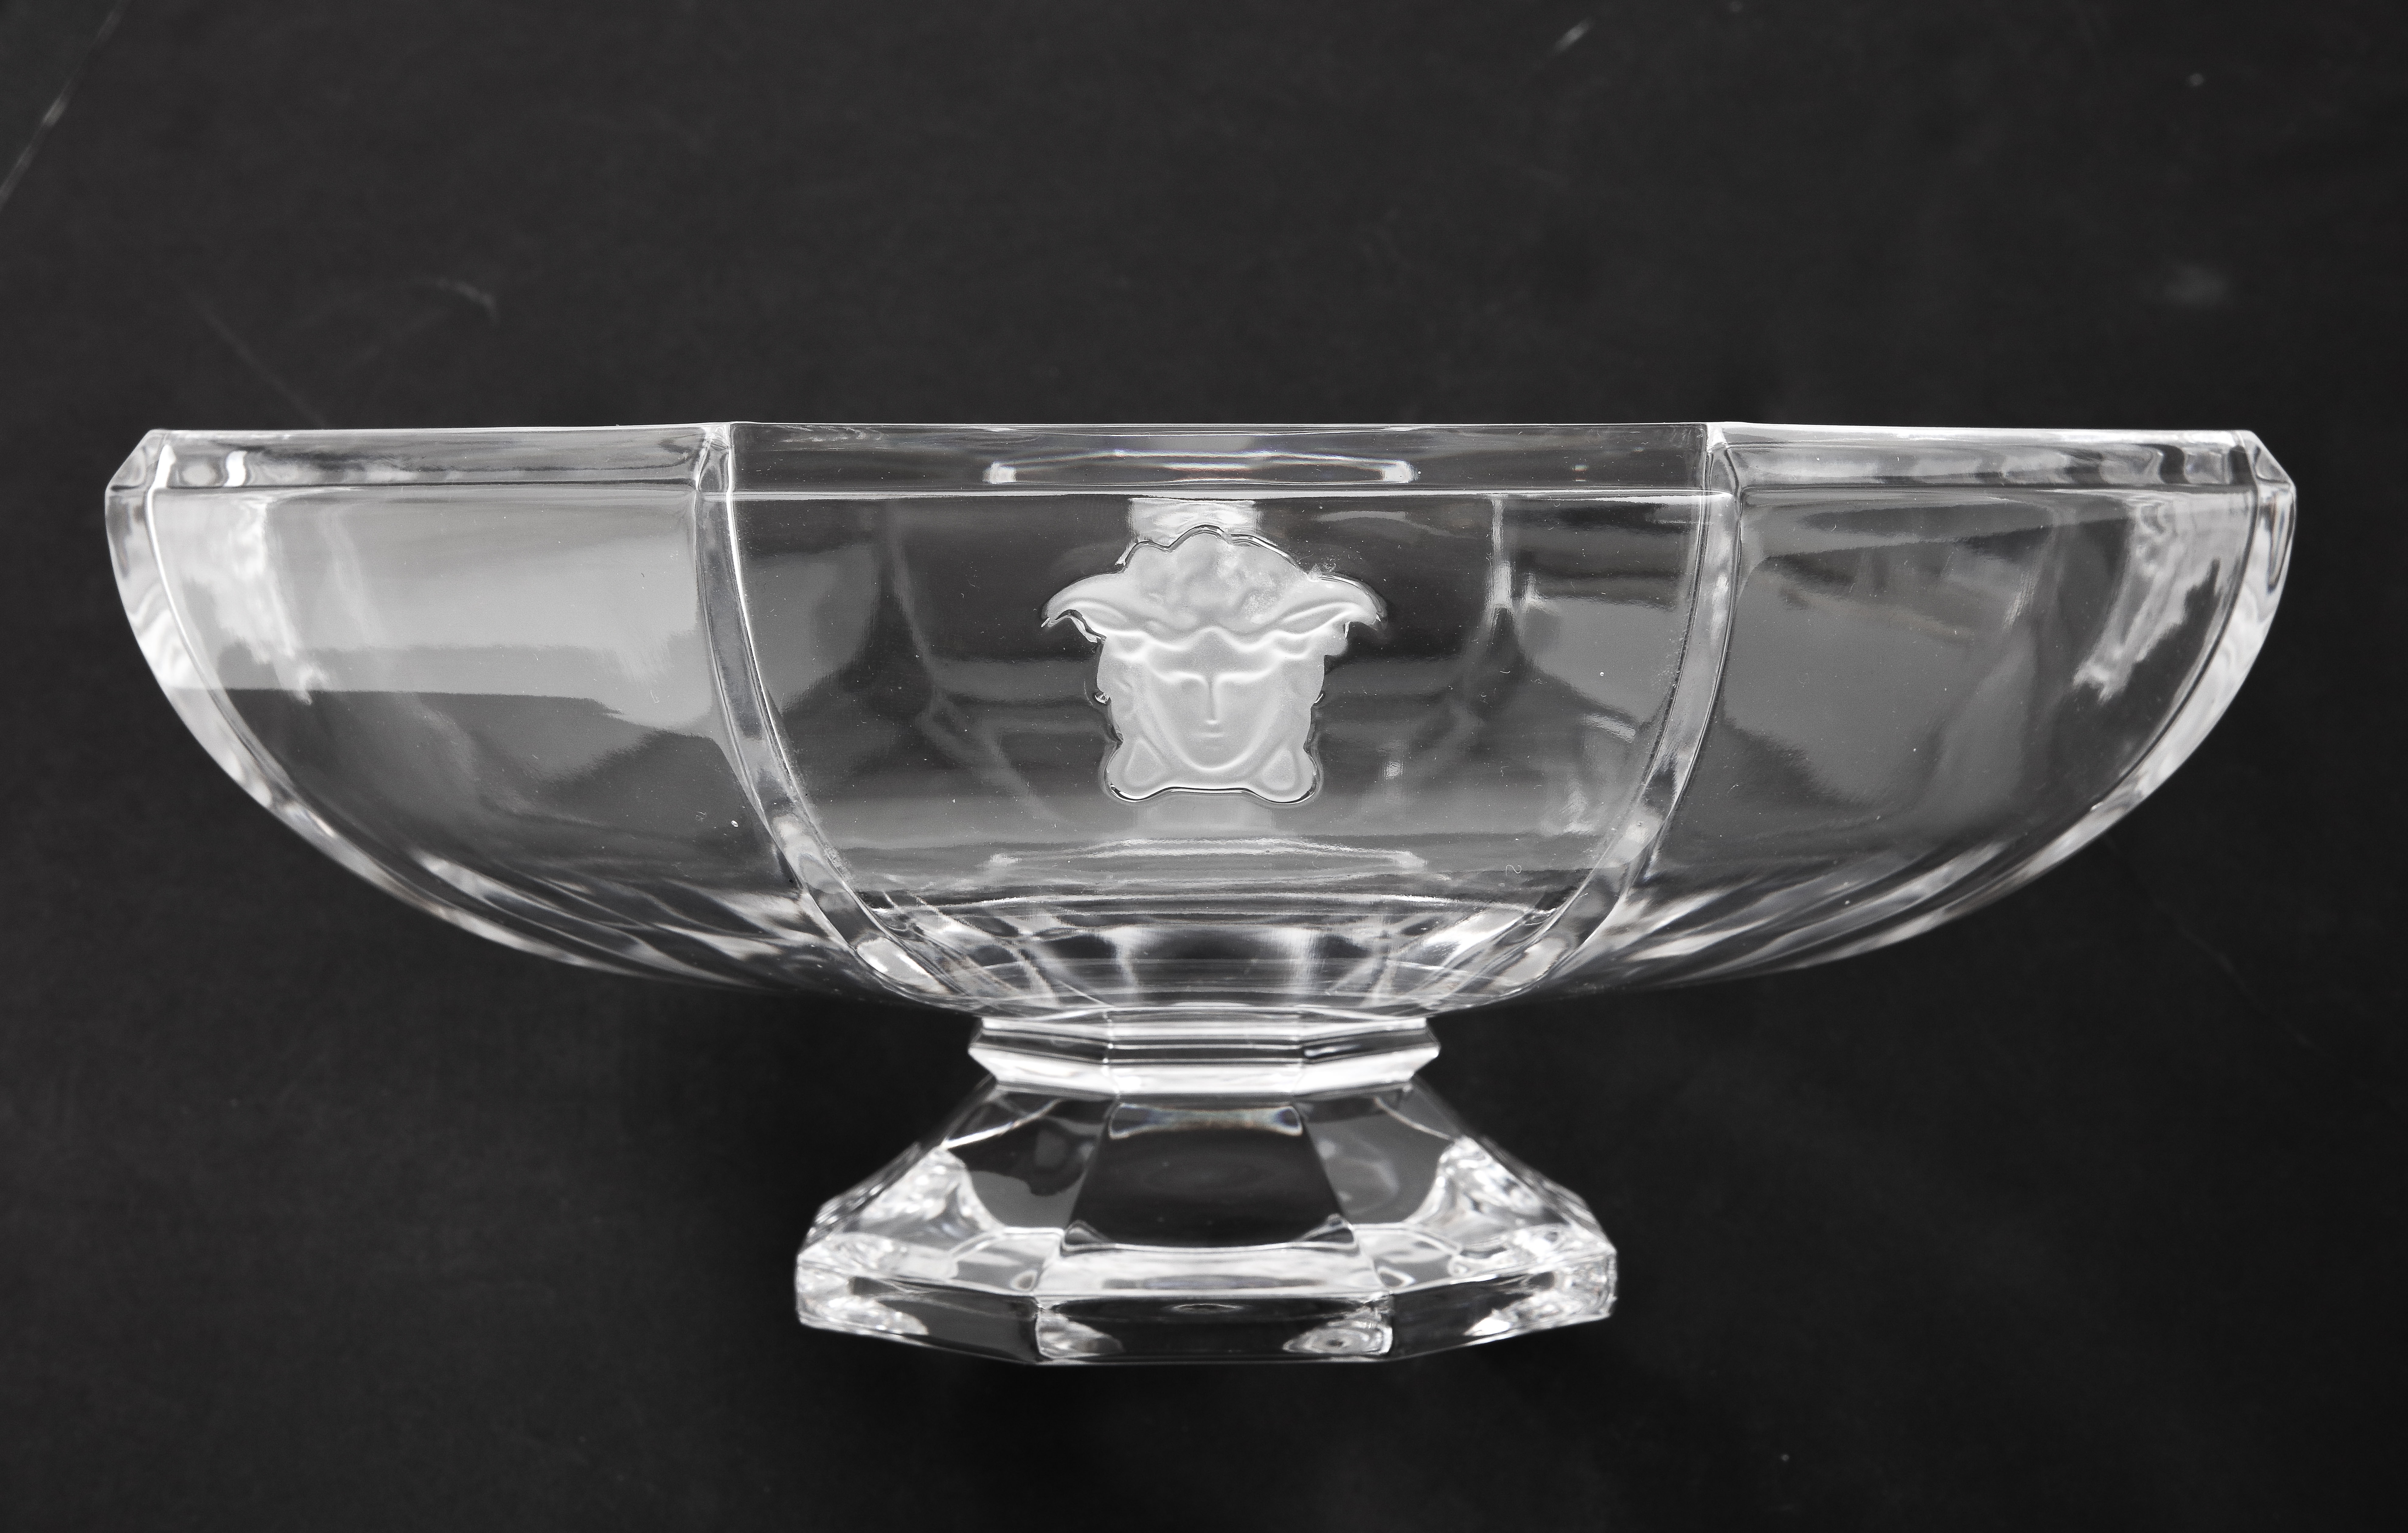 1980's Gianni Versace designed for Rosenthal crystal decorative bowl with medusa motif, in vintage original condition with some wear and patina due to age and use.